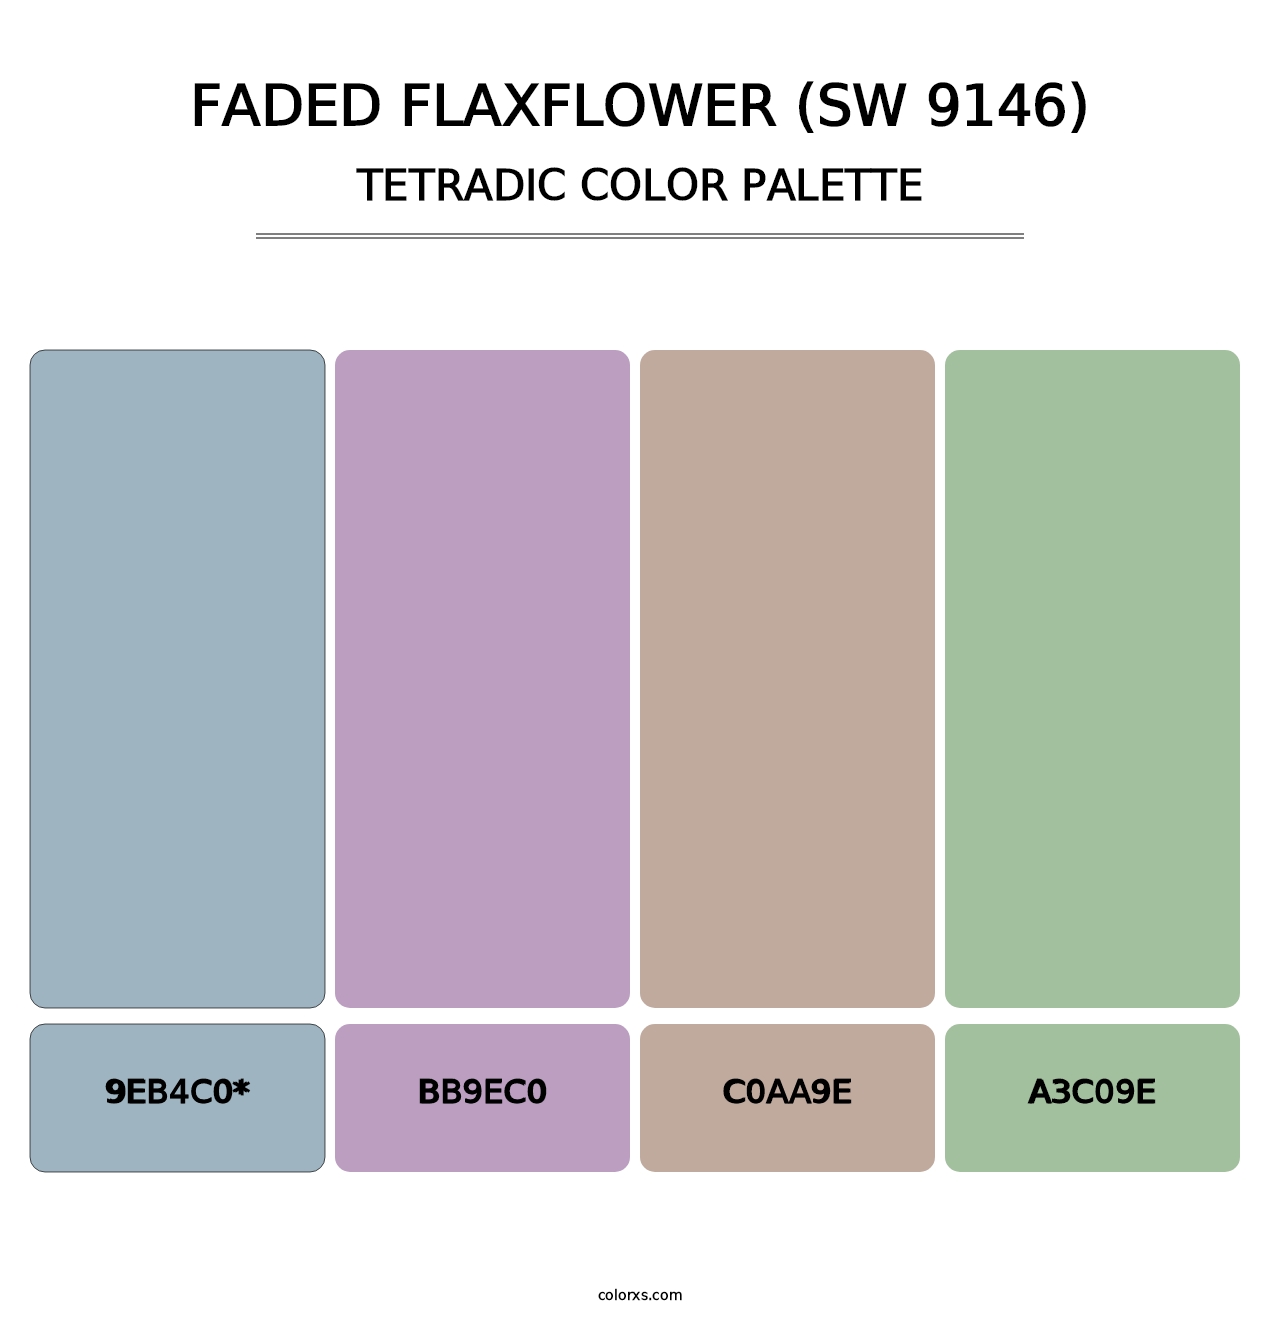 Faded Flaxflower (SW 9146) - Tetradic Color Palette